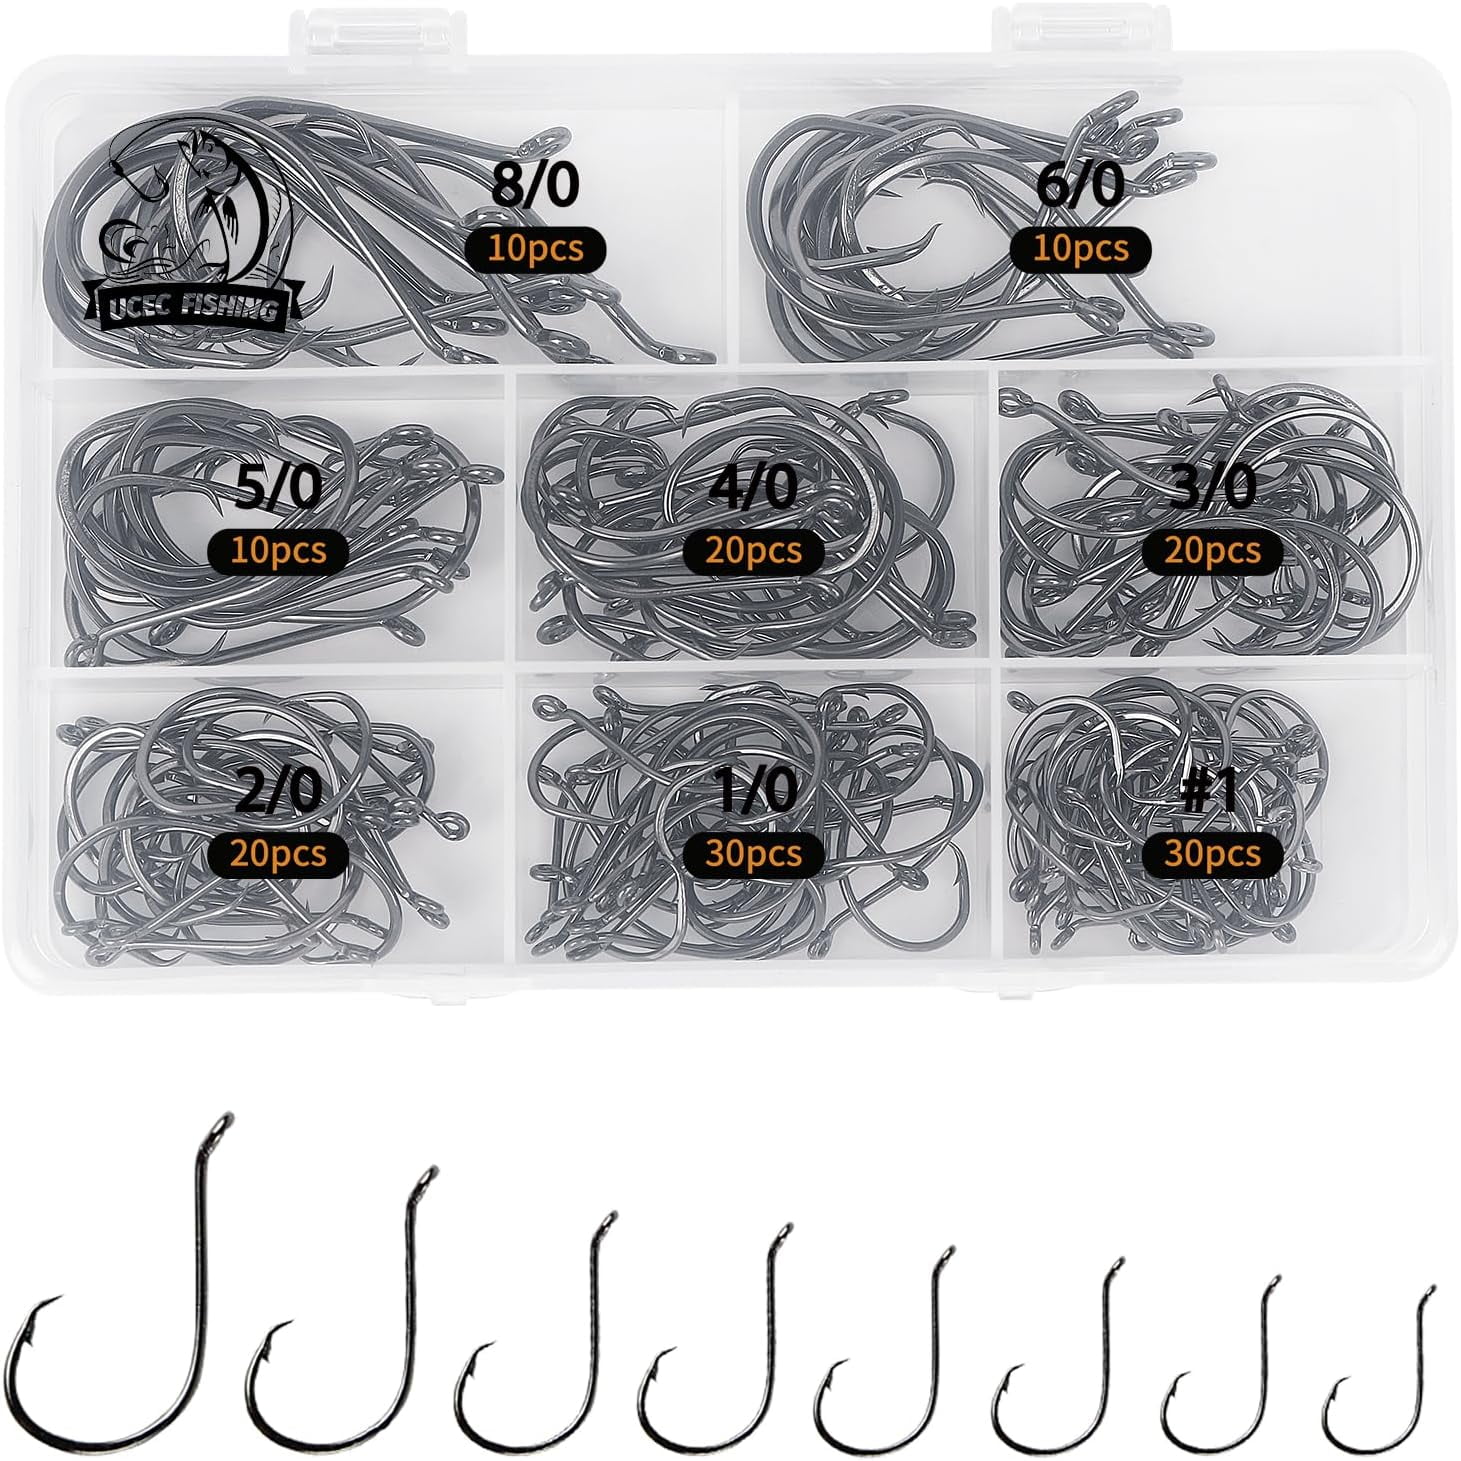 UCEC 150 Pieces Per Box Circle 2X Strong Customized Offset Sport Hooks  Black High Carbon Steel Octopus Fishing Hooks - Size:#1 1/0 2/0 3/0 4/0 5/0  6/0 8/0 